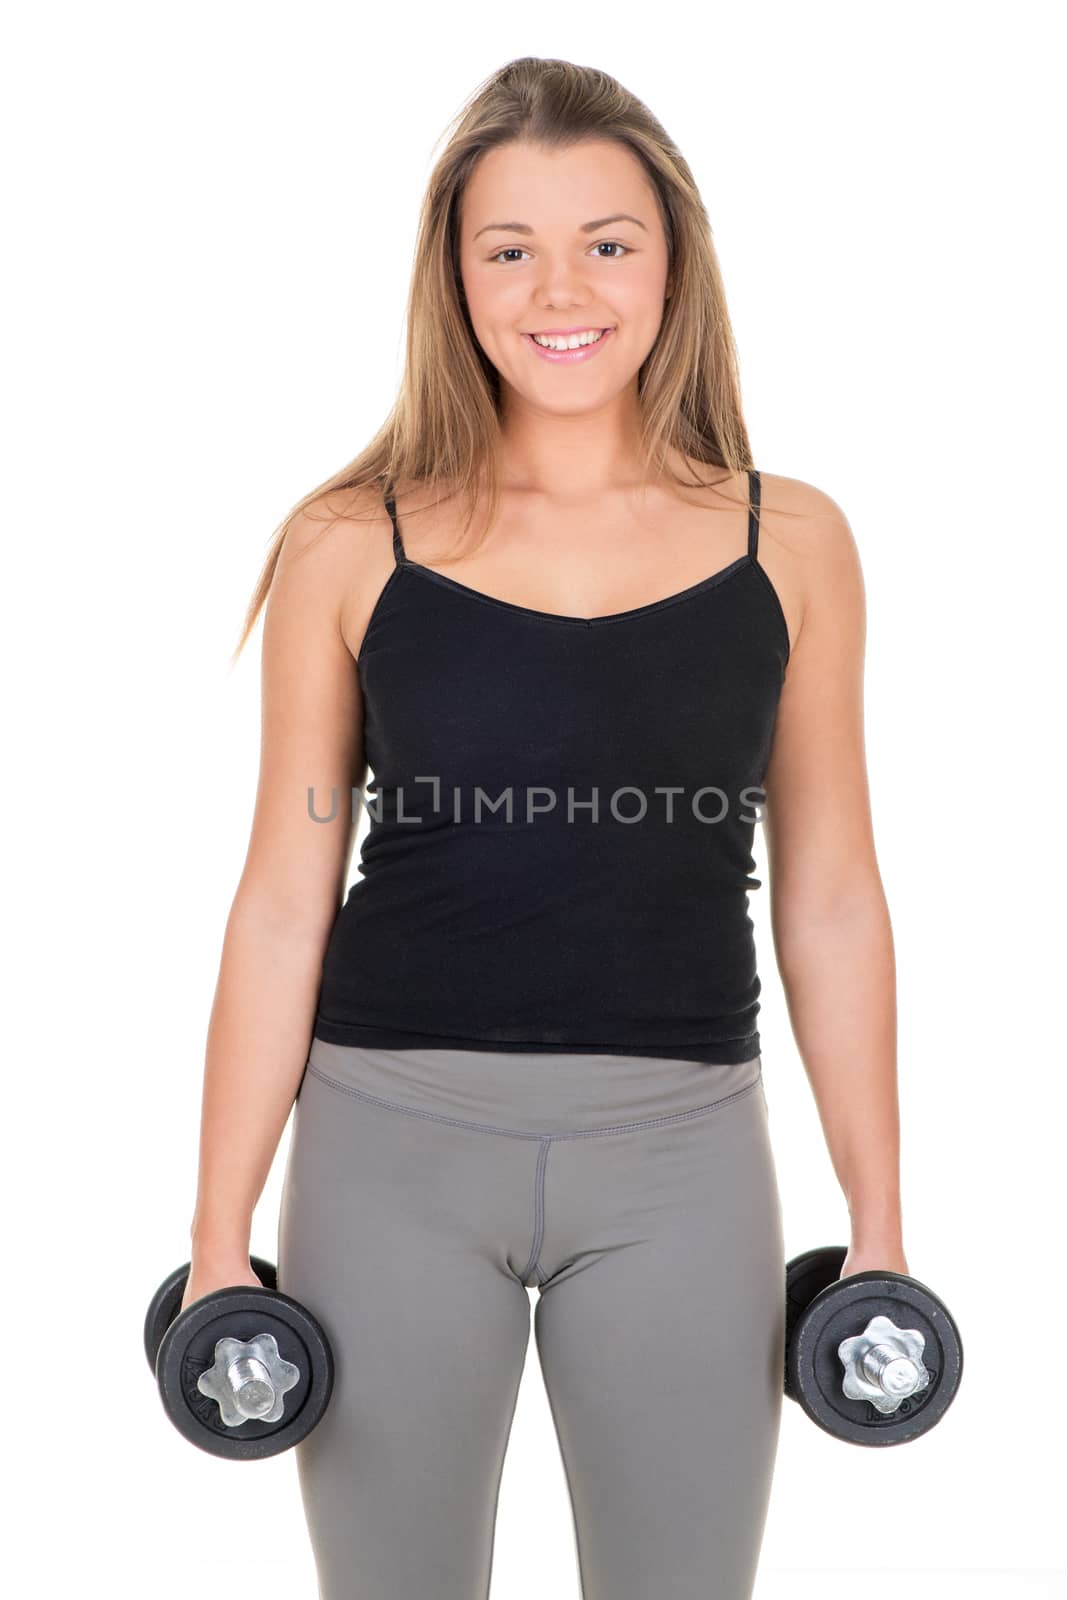 Beautiful woman with dumbbells by MilanMarkovic78